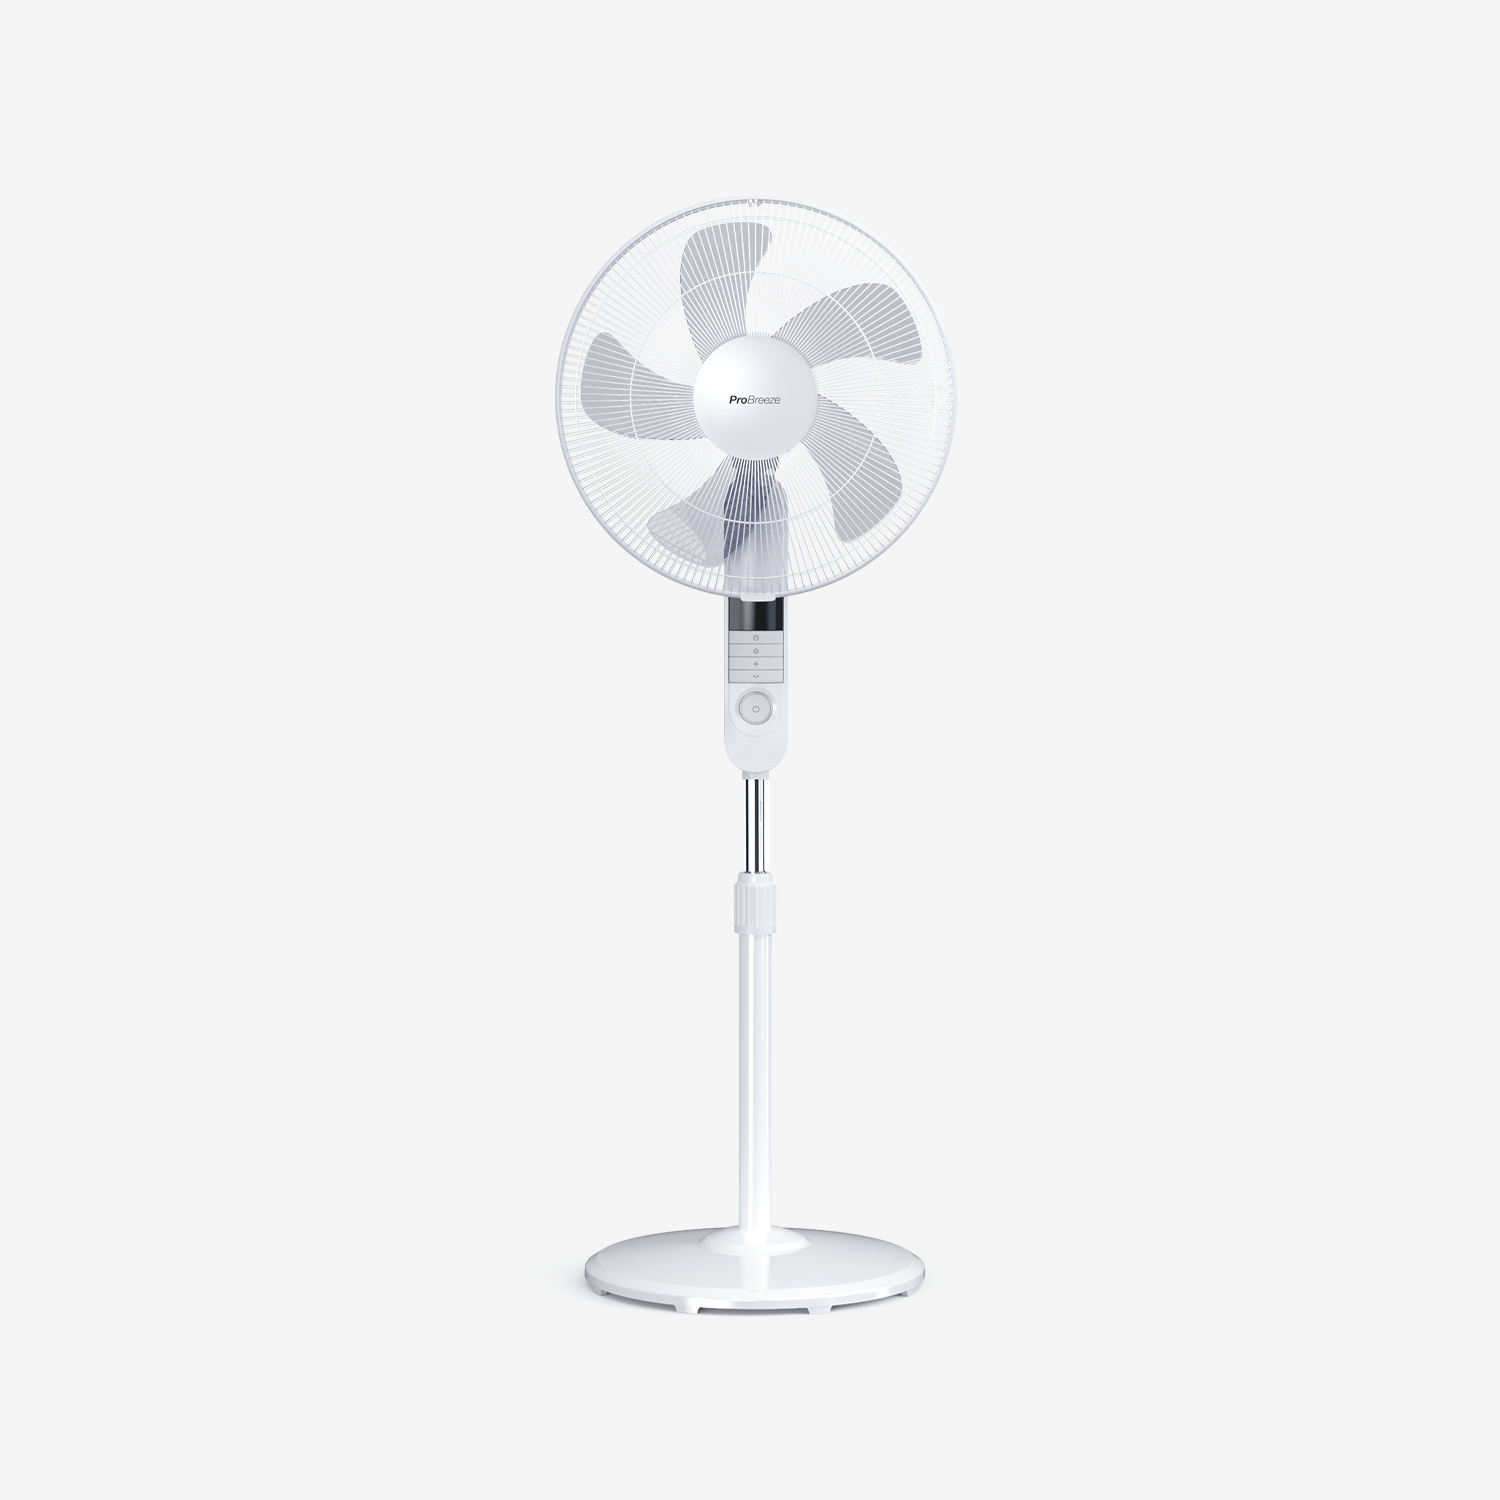 16" Pedestal Fan with 4 Fan Modes and Remote Control